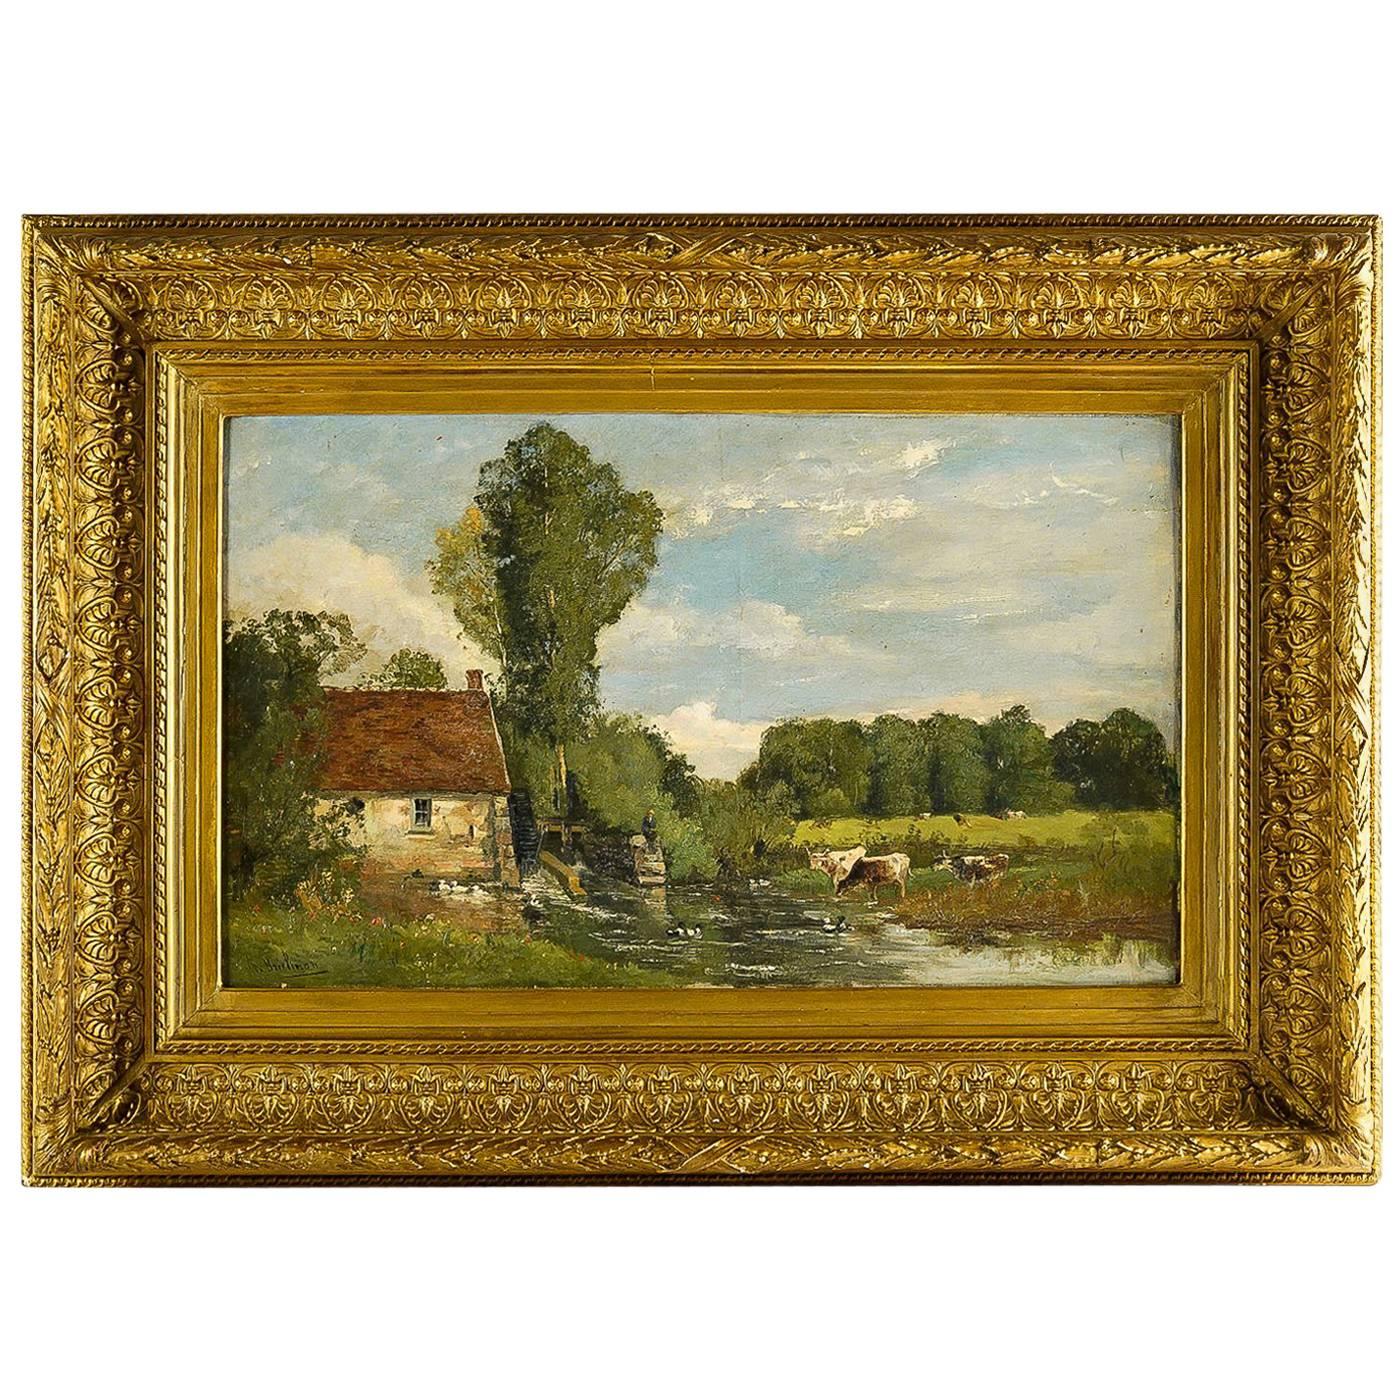 Brielman Jacques Alfred, Old Mill by a River, Oil on Canvas, circa 1860-1870